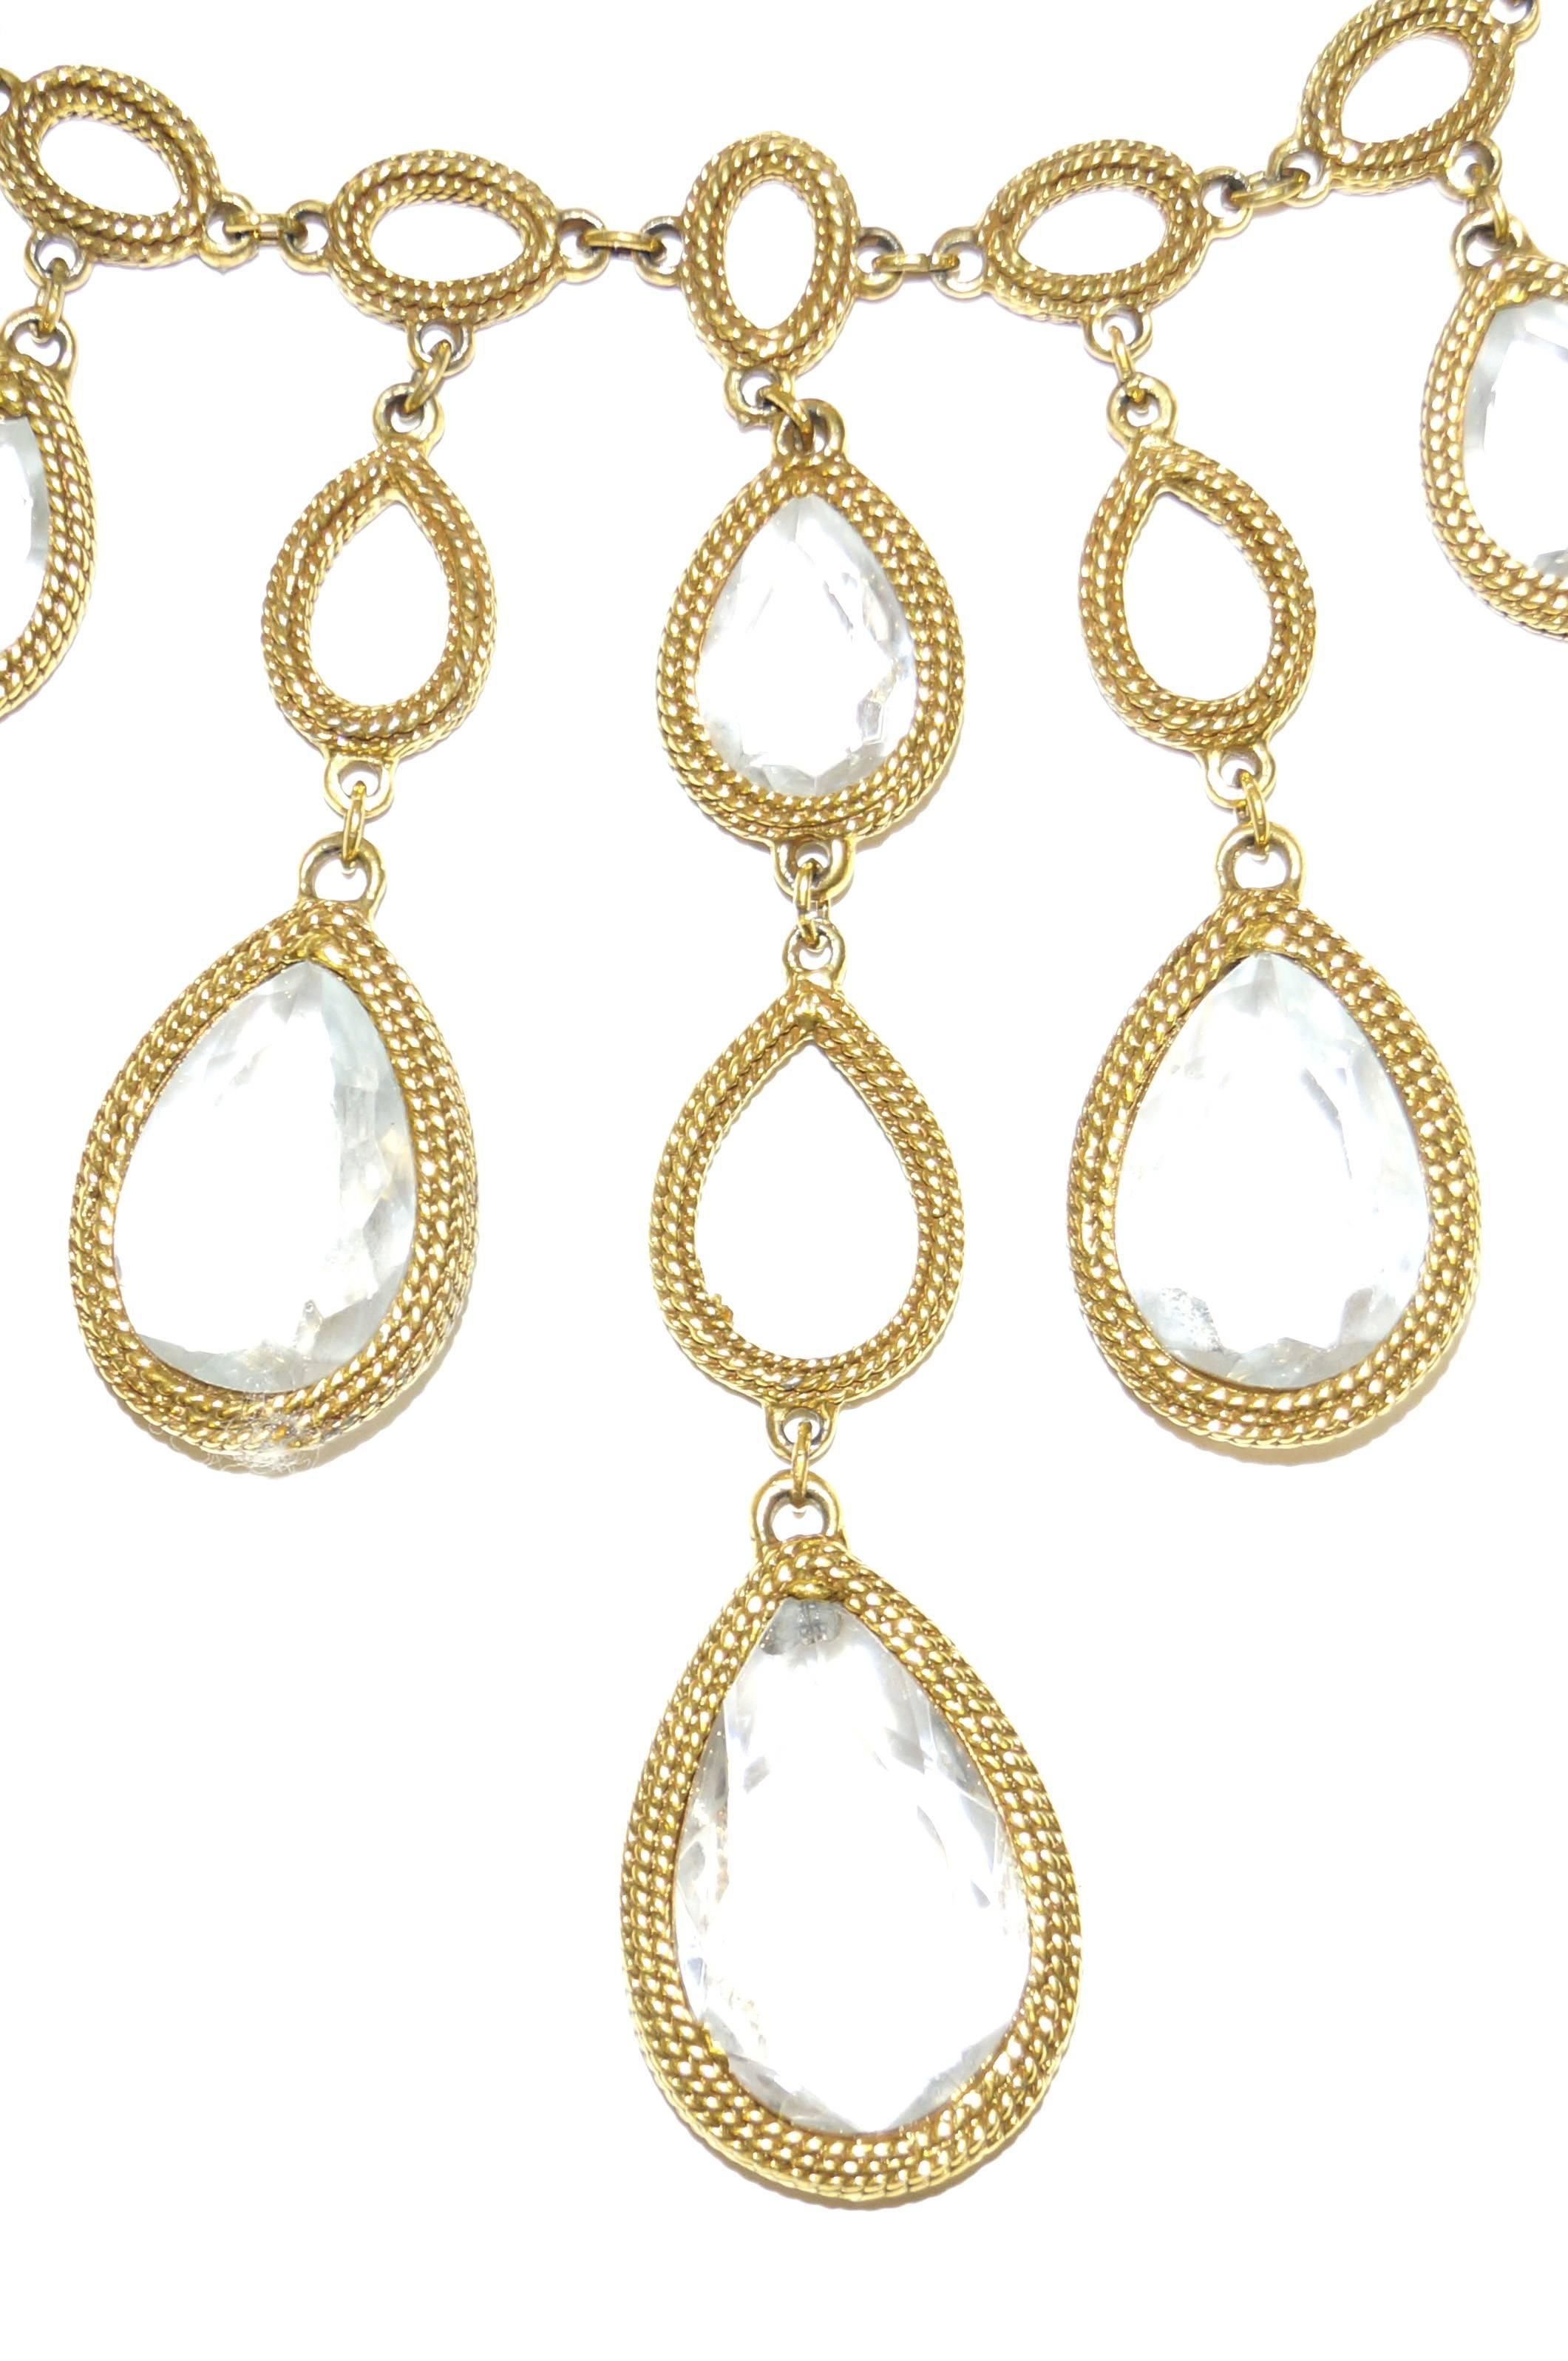 1960s dramatic oversized Goldette glass chandelier drop necklace! The necklace is gold - tone and rope - textured. Necklace features seven hanging strands of graduated lengths, composed of alternating glass chandelier jewels in teardrop frames. The